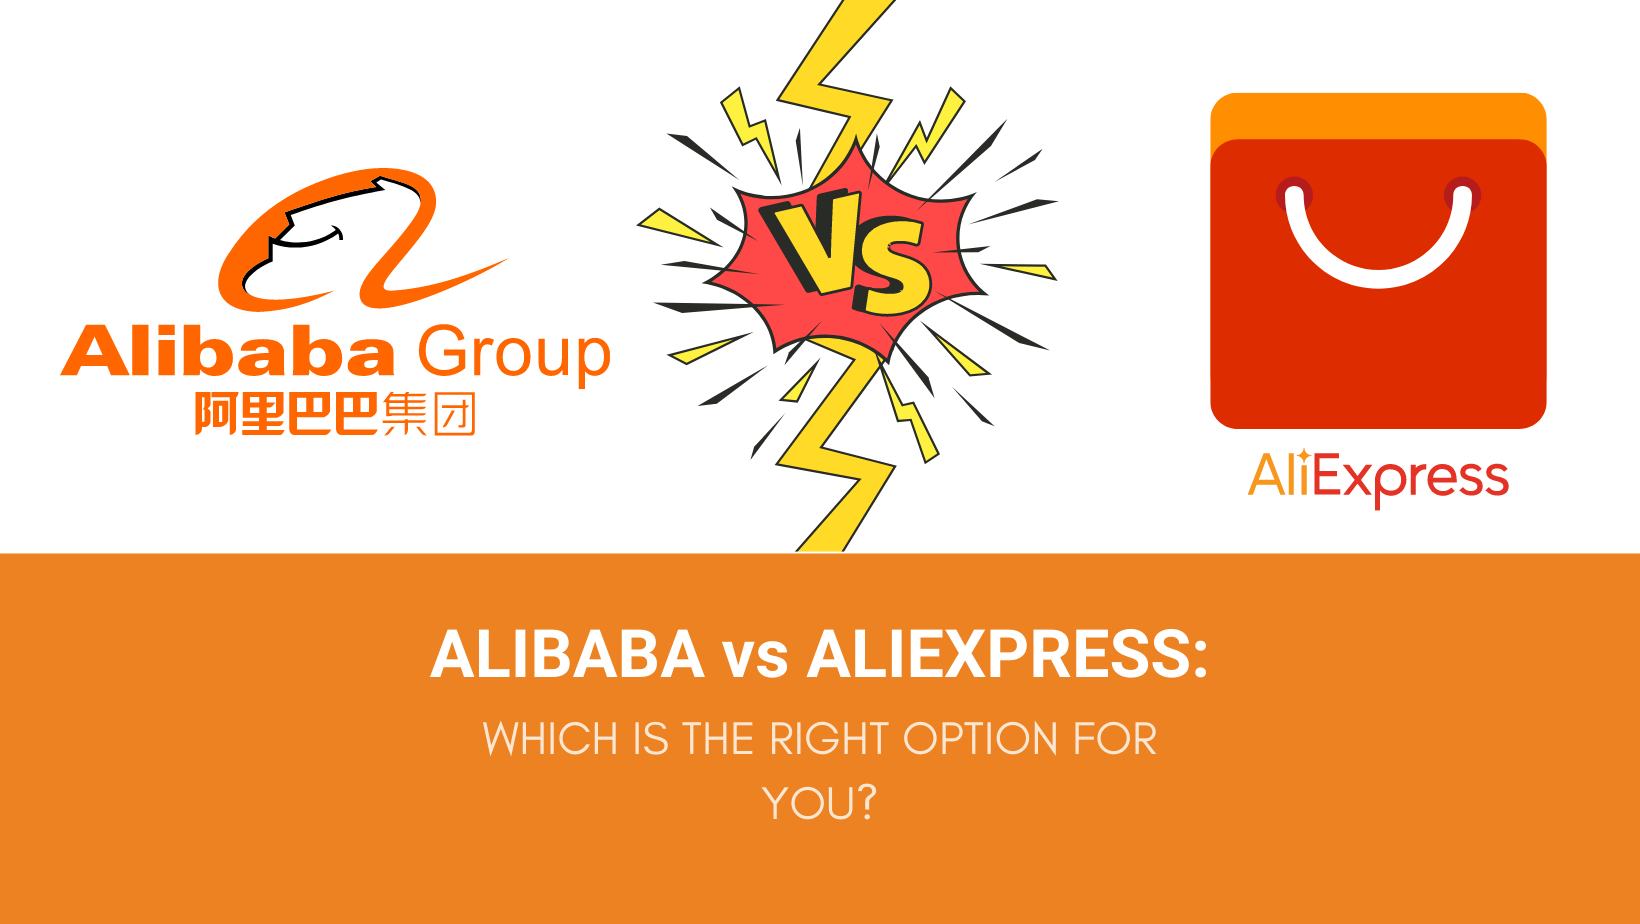 ALIBABA vs ALIEXPRESS WHICH IS THE RIGHT OPTION FOR YOU